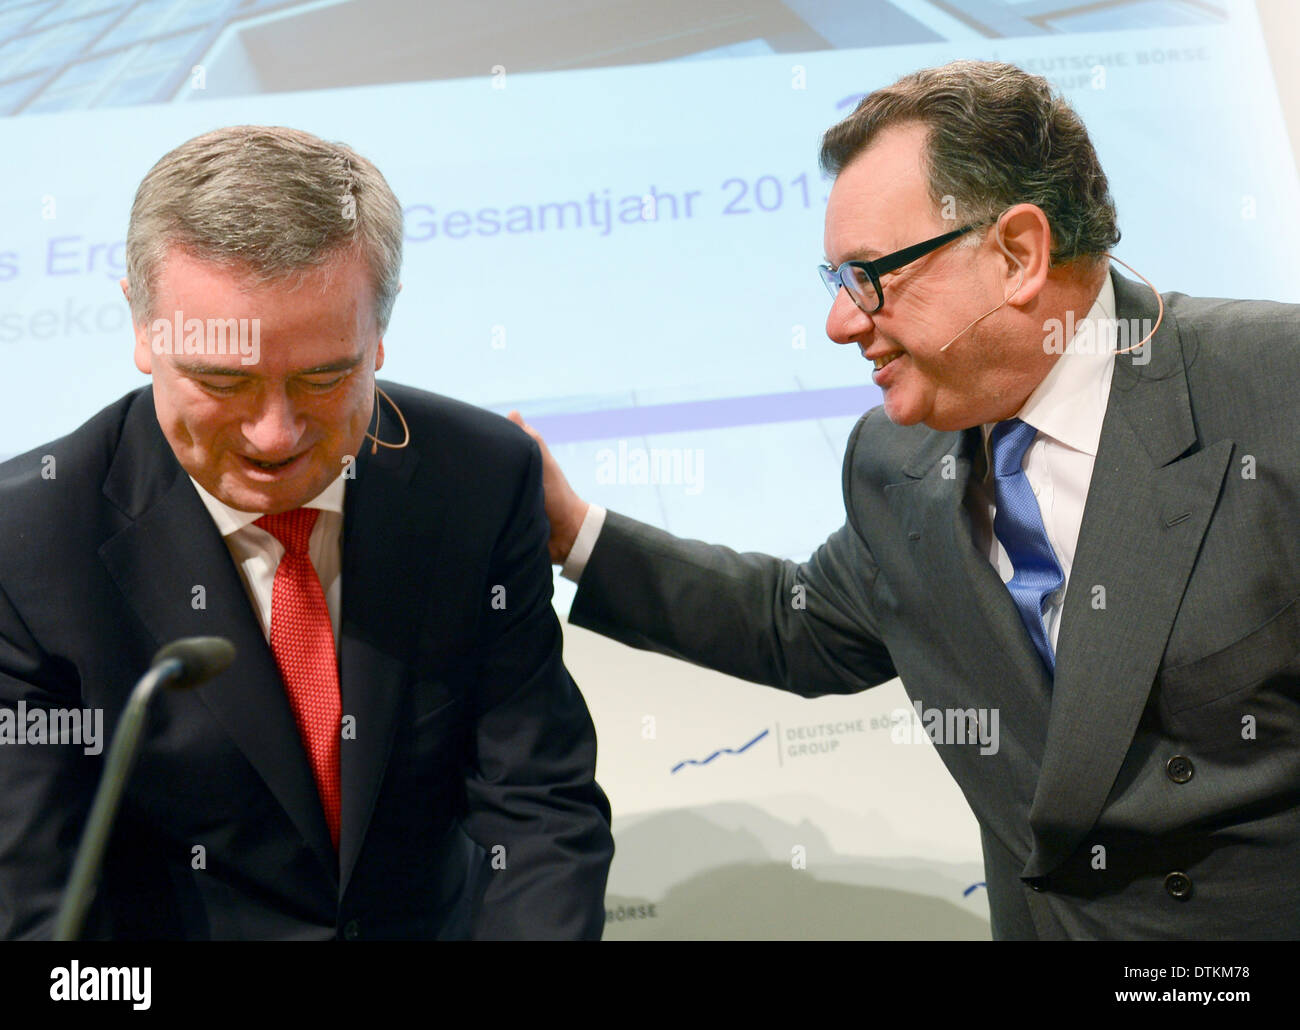 Frankfurt Main, Germany. 20th Feb, 2014. CEO of Deutsch Boerse Reto Francioni (R) pats CFO Gregor Pottmeyer on the back during the annual figures press conference in Frankfurt Main, Germany, 20 February 2014. The German Stock Exchange barely profitted from the record increases on the stock market last year. The bottom line was actually a decrease of more than a quarter to 478.4 million euros. Photo: ARNE DEDERT/dpa/Alamy Live News Stock Photo